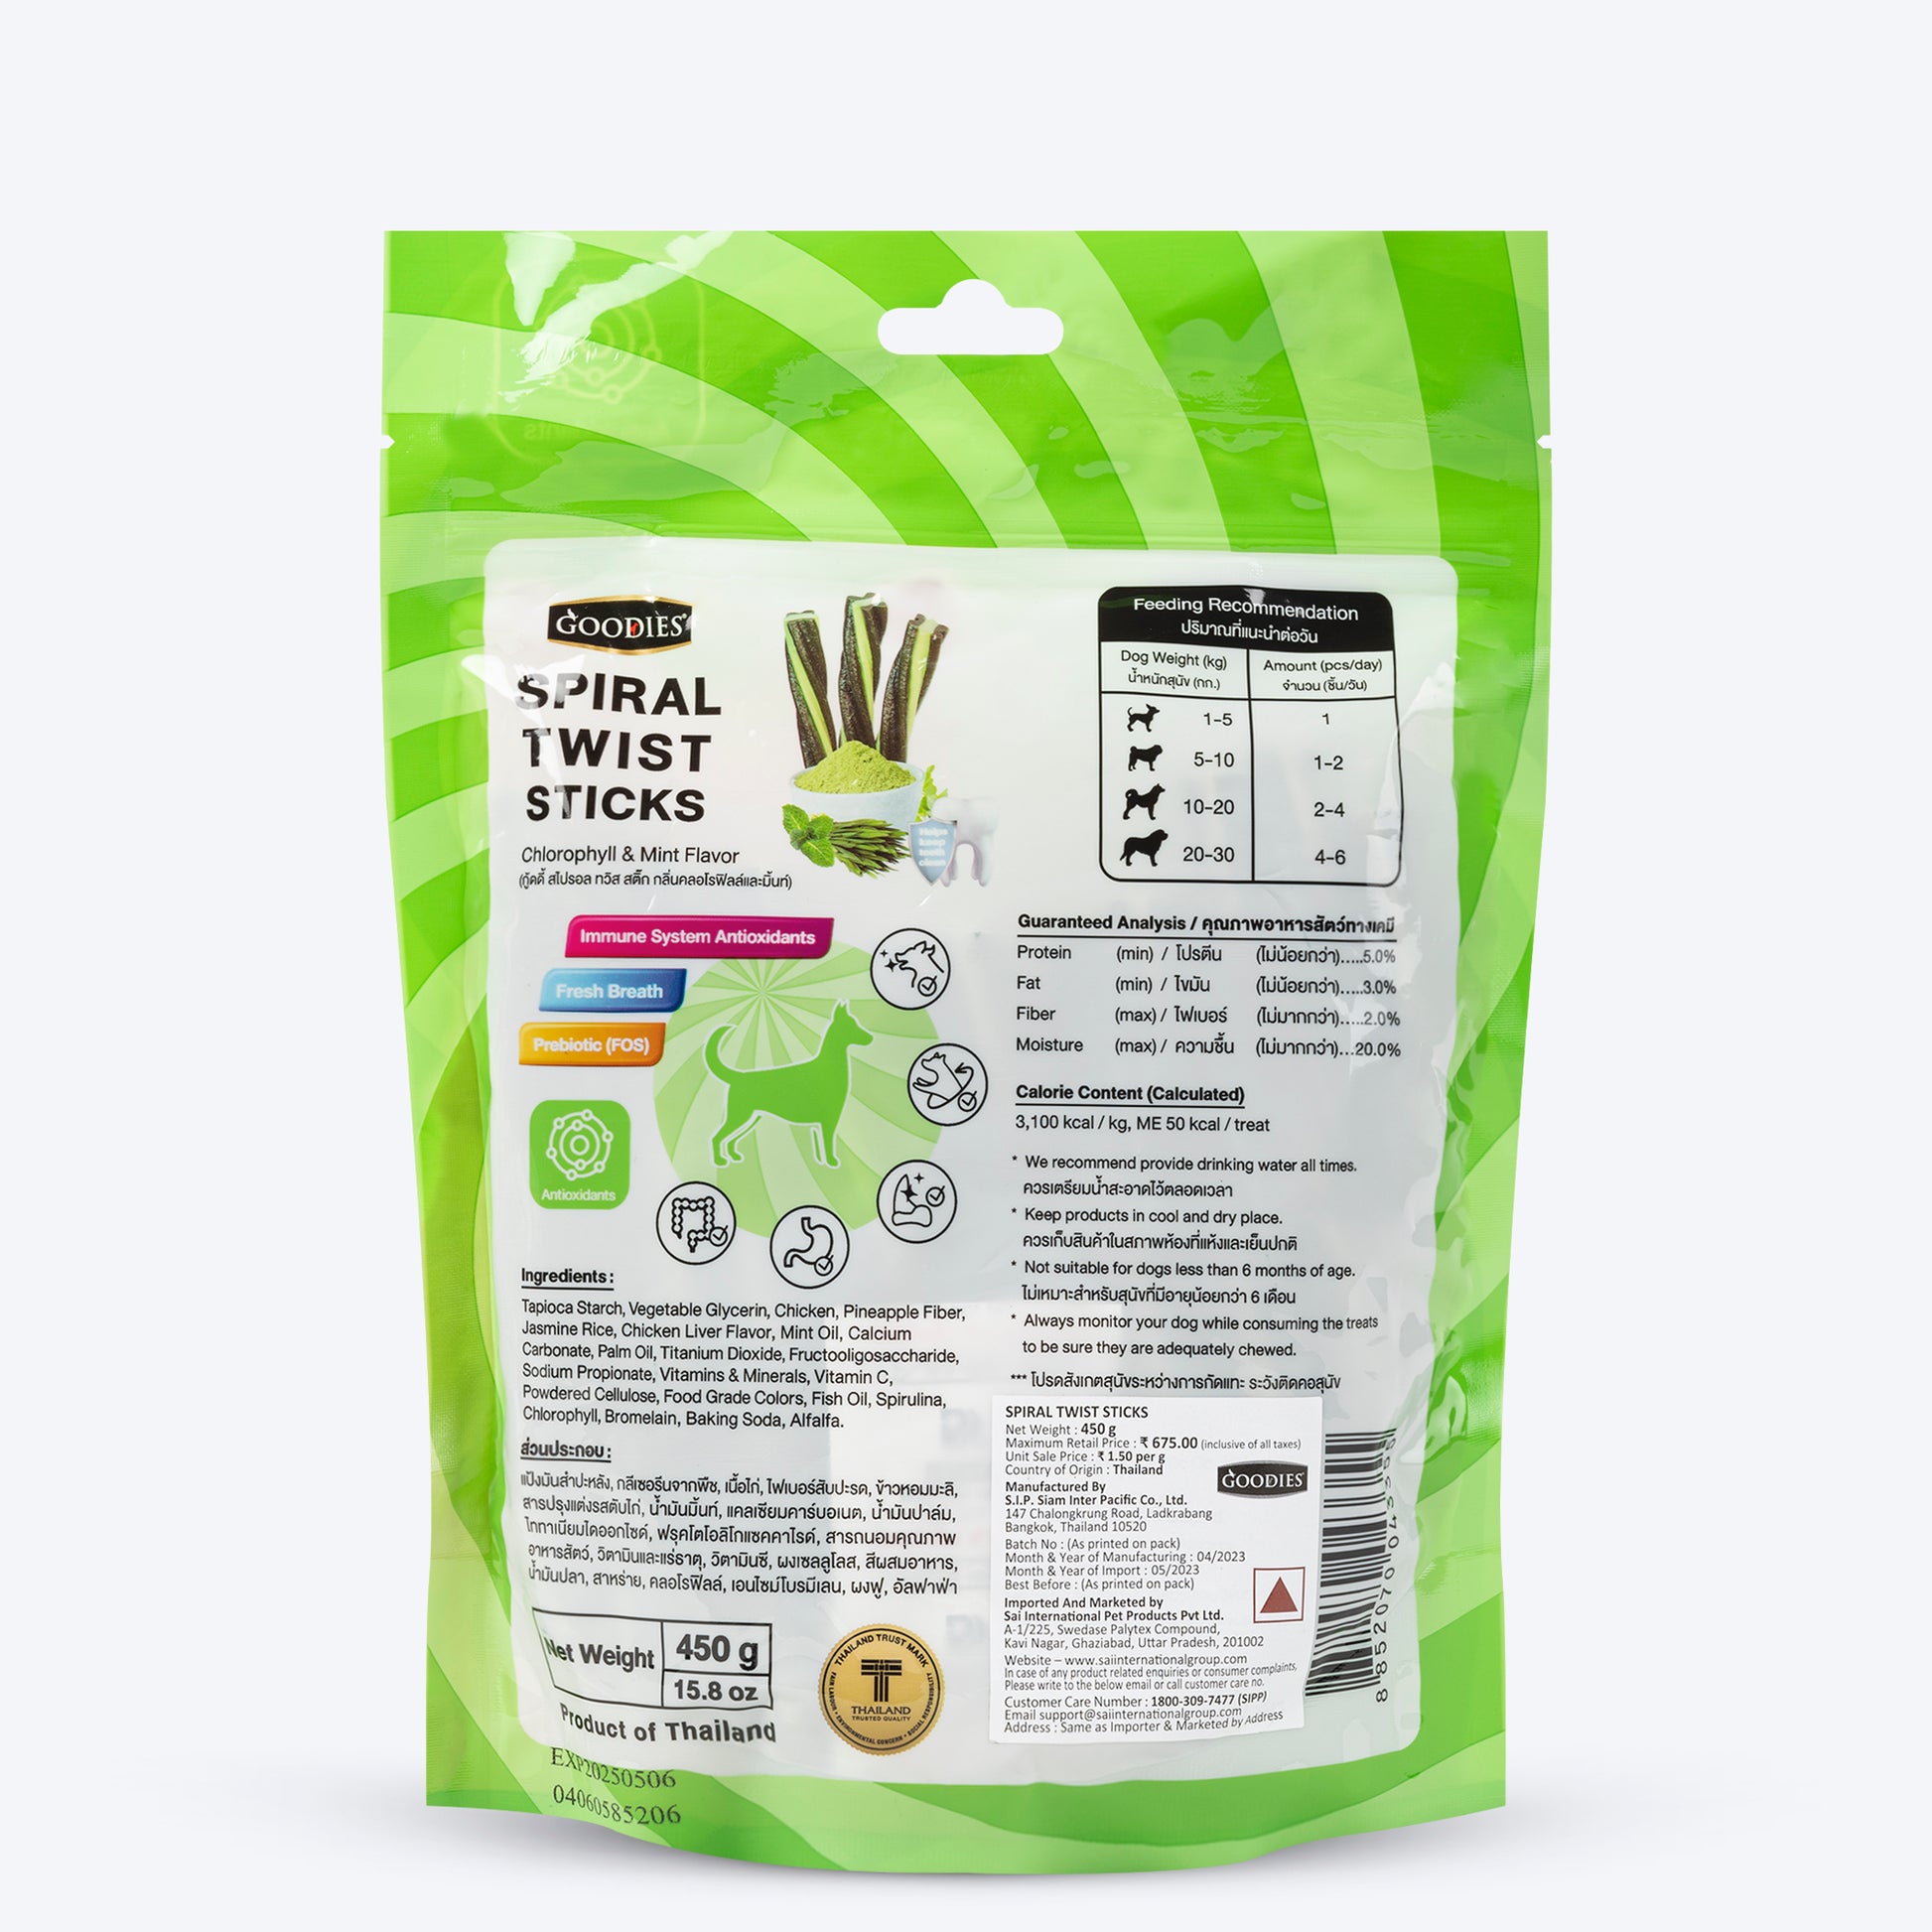 Goodies Spiral Twist Sticks Chlorophyll & Mint Flavour For Dogs - 450 g - Heads Up For Tails